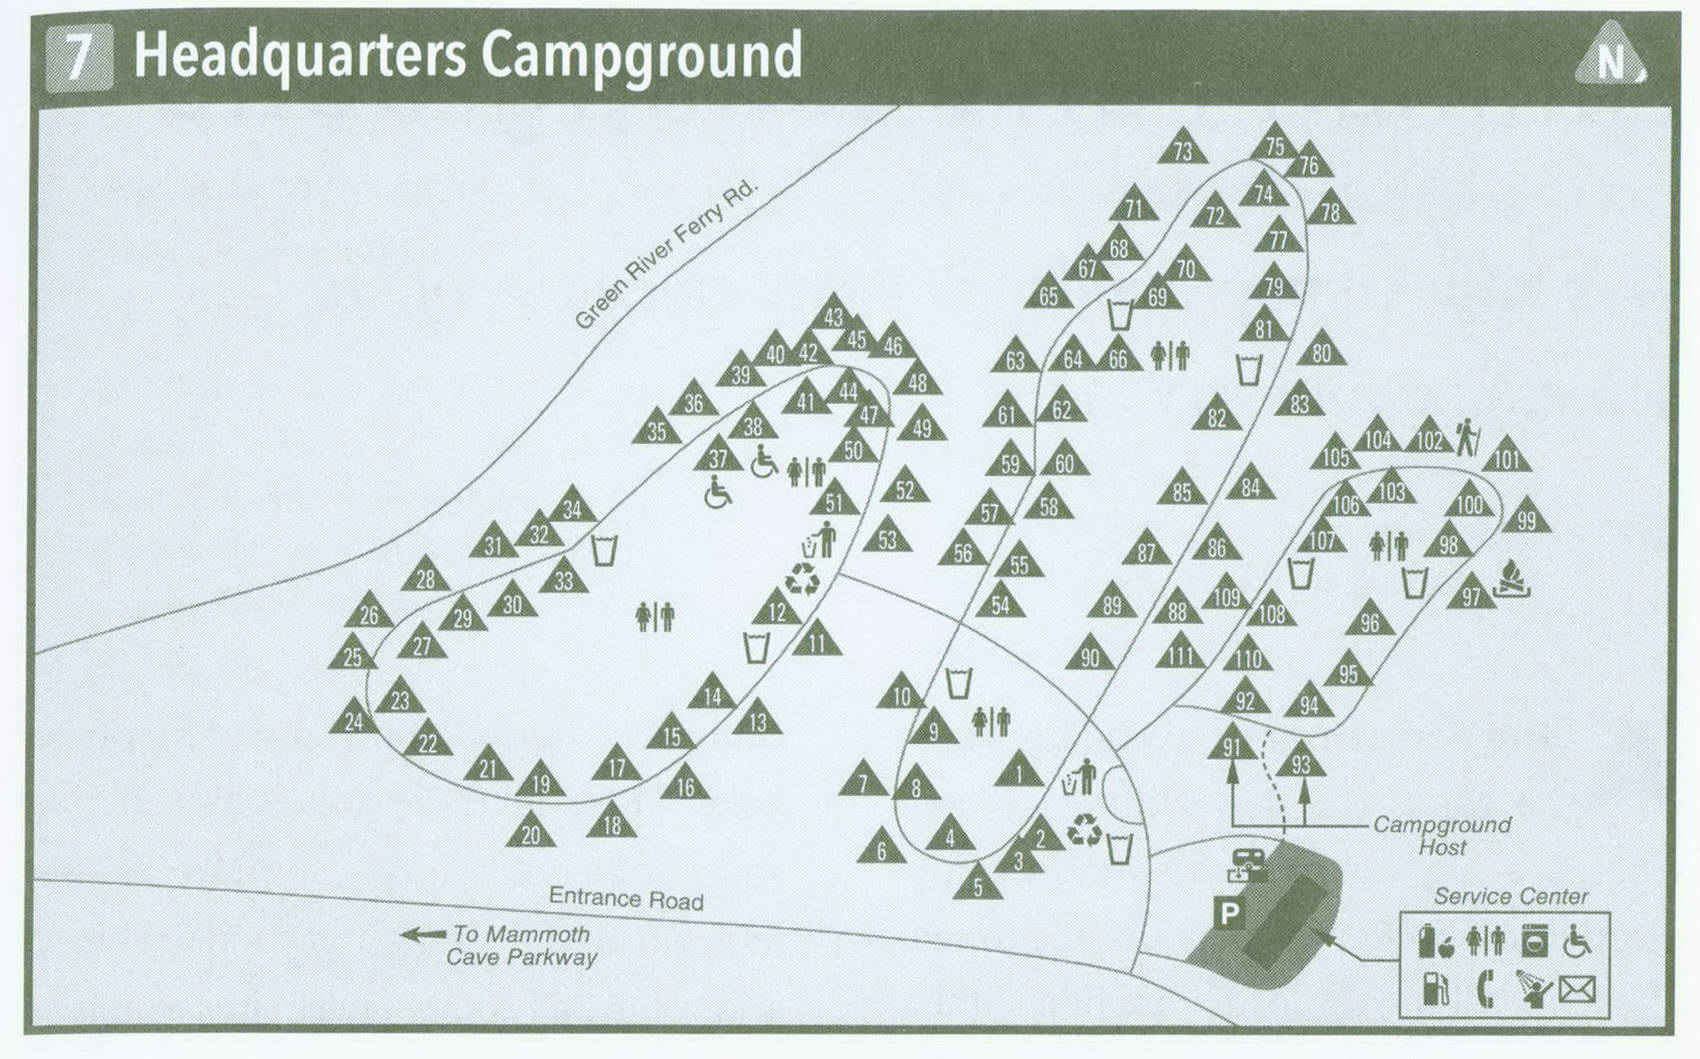 Plan of Headquarters Campground